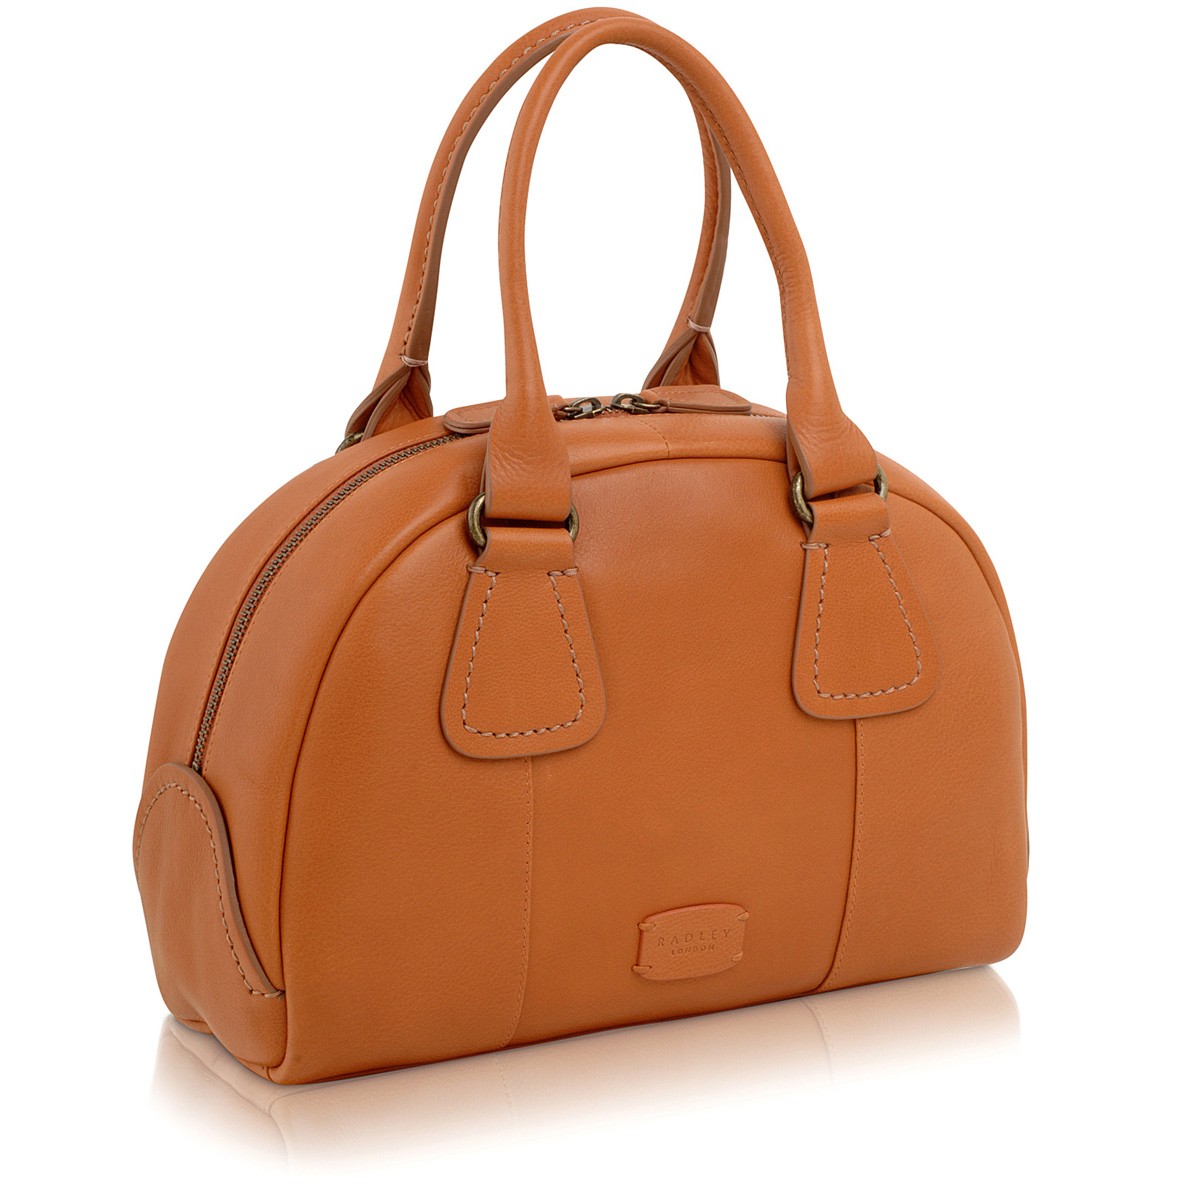 Radley Bags - Radley&#39;s latest leather bags to be released.